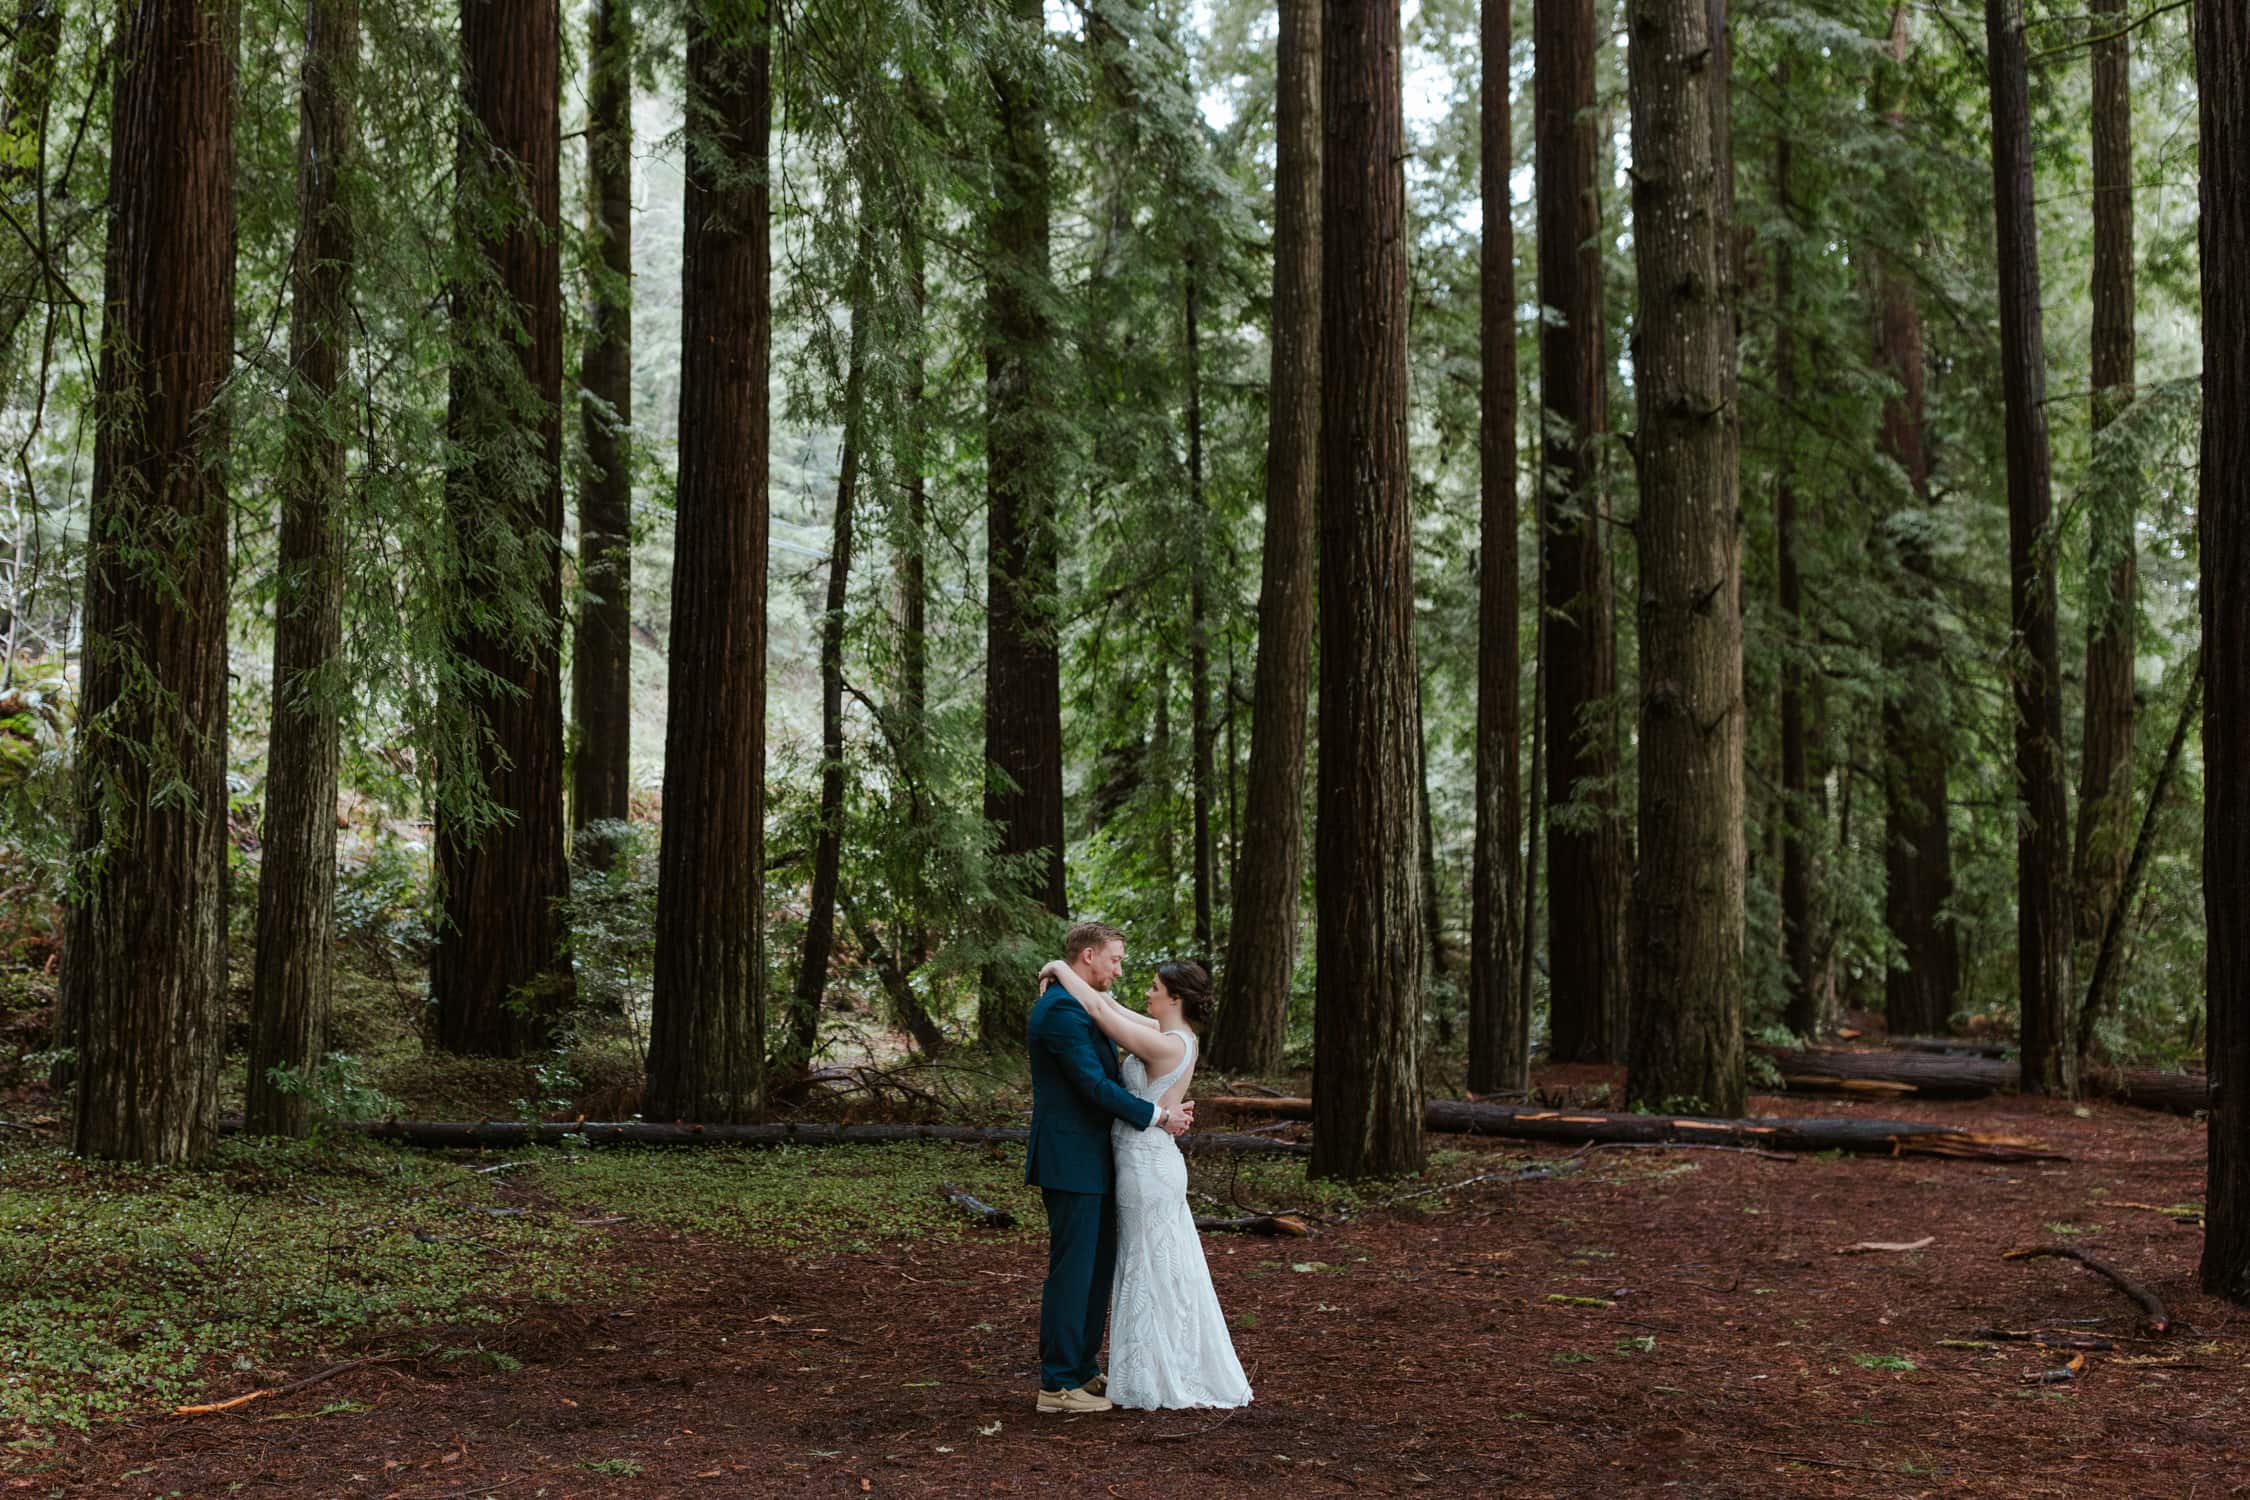 A bride and groom sharing a first dance in Templeman Grove in Redwood National Park.